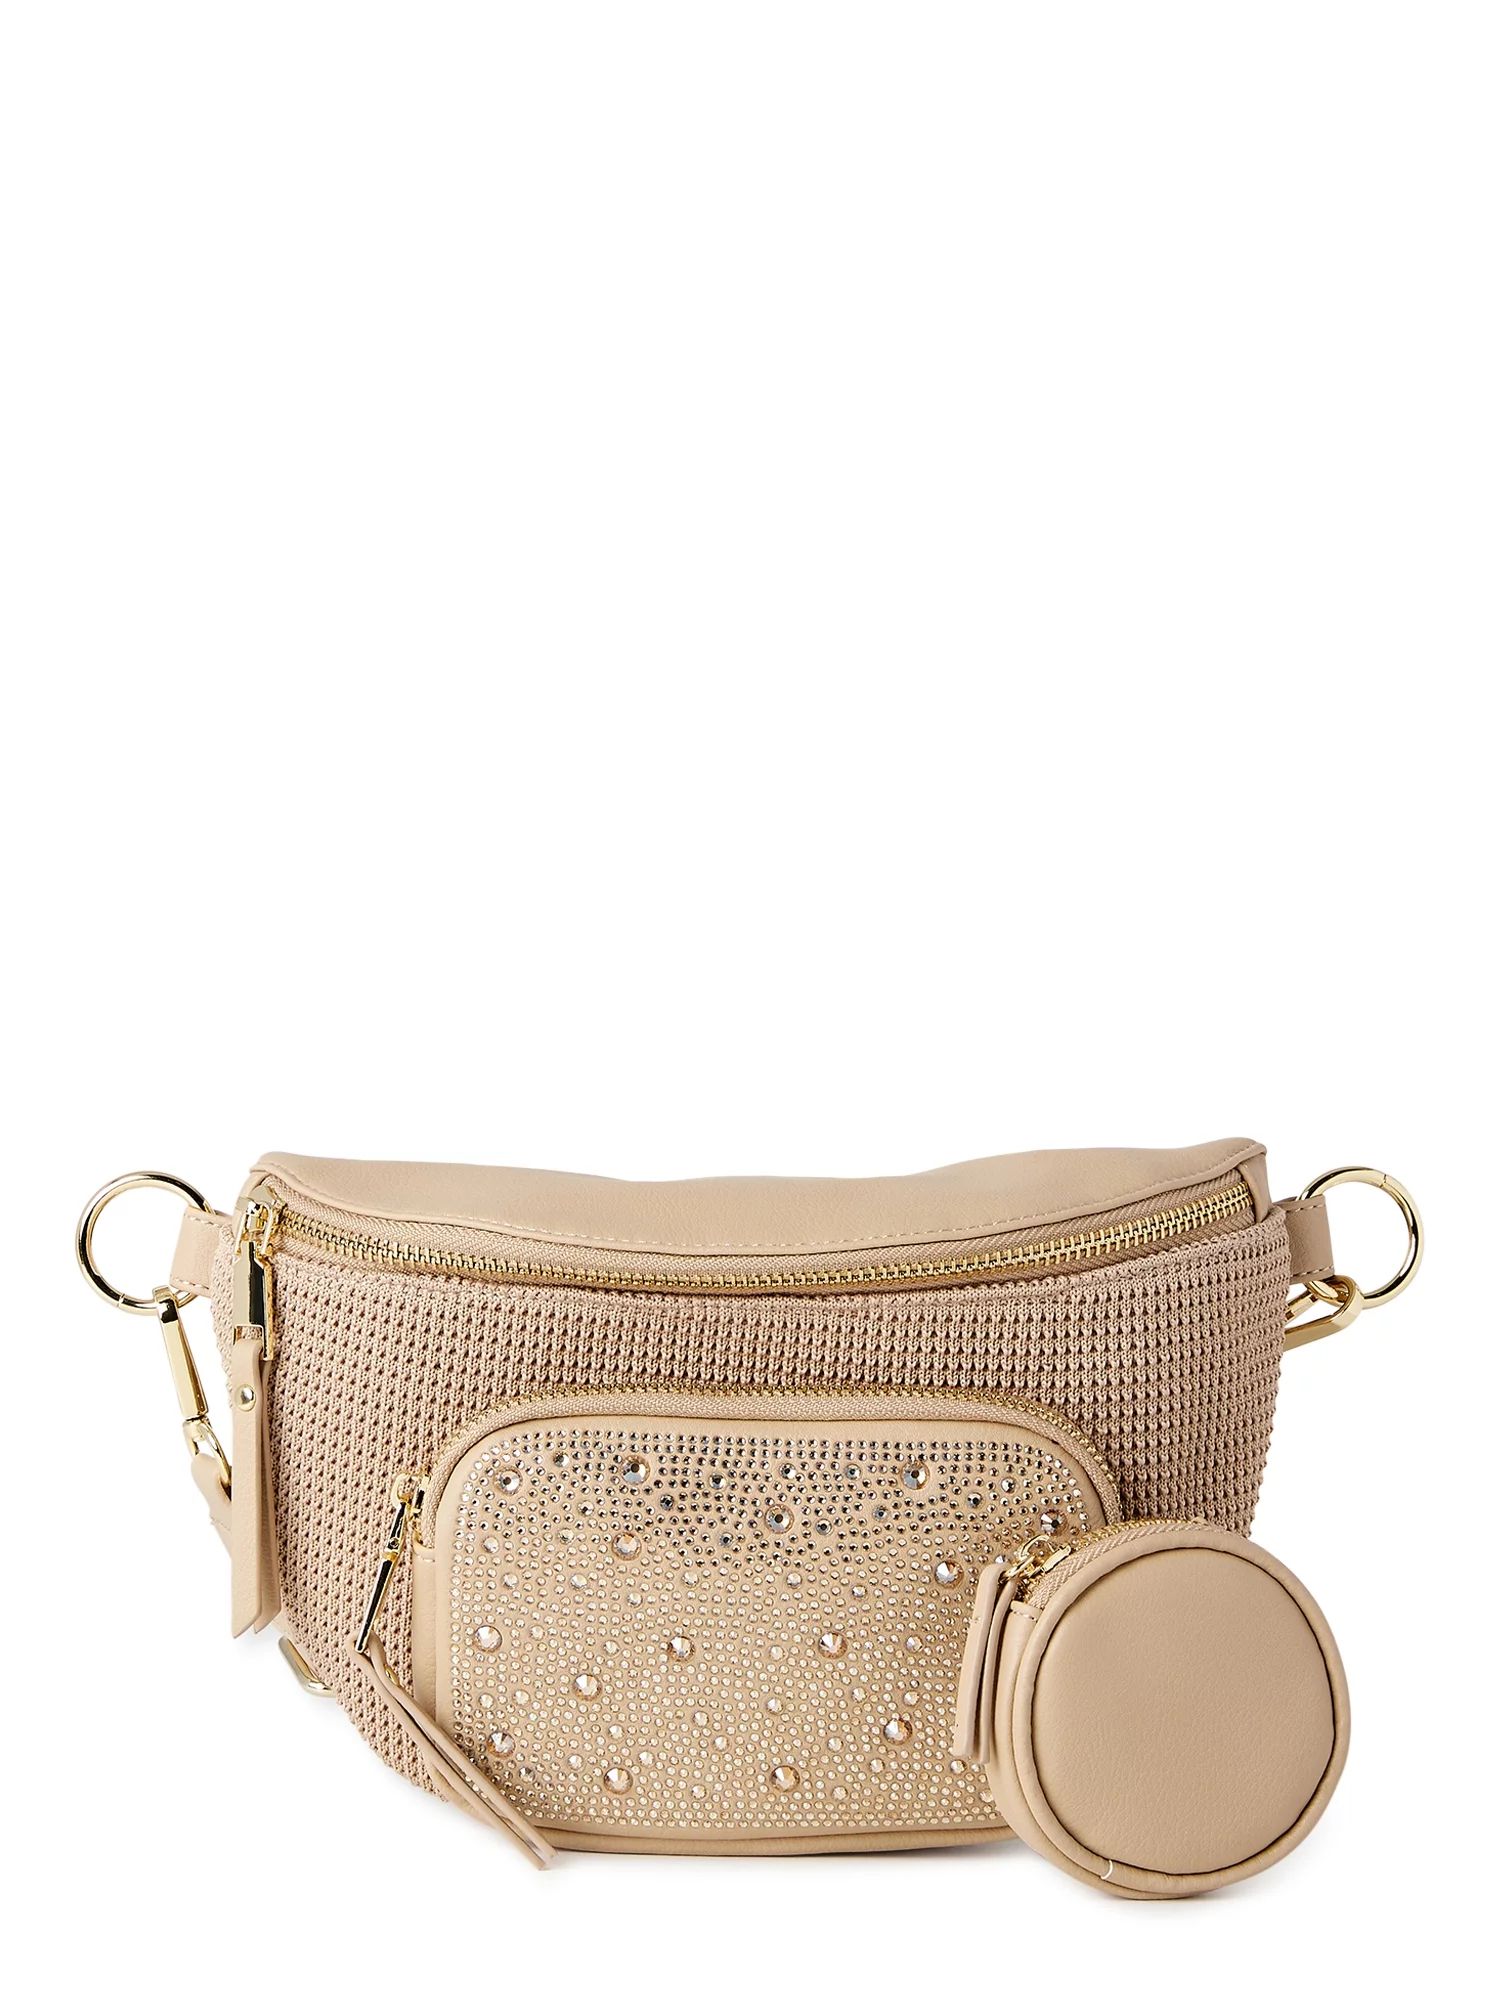 Madden NYC Women's Multi Belt Bag Fanny Pack Toasted Almond | Walmart (US)